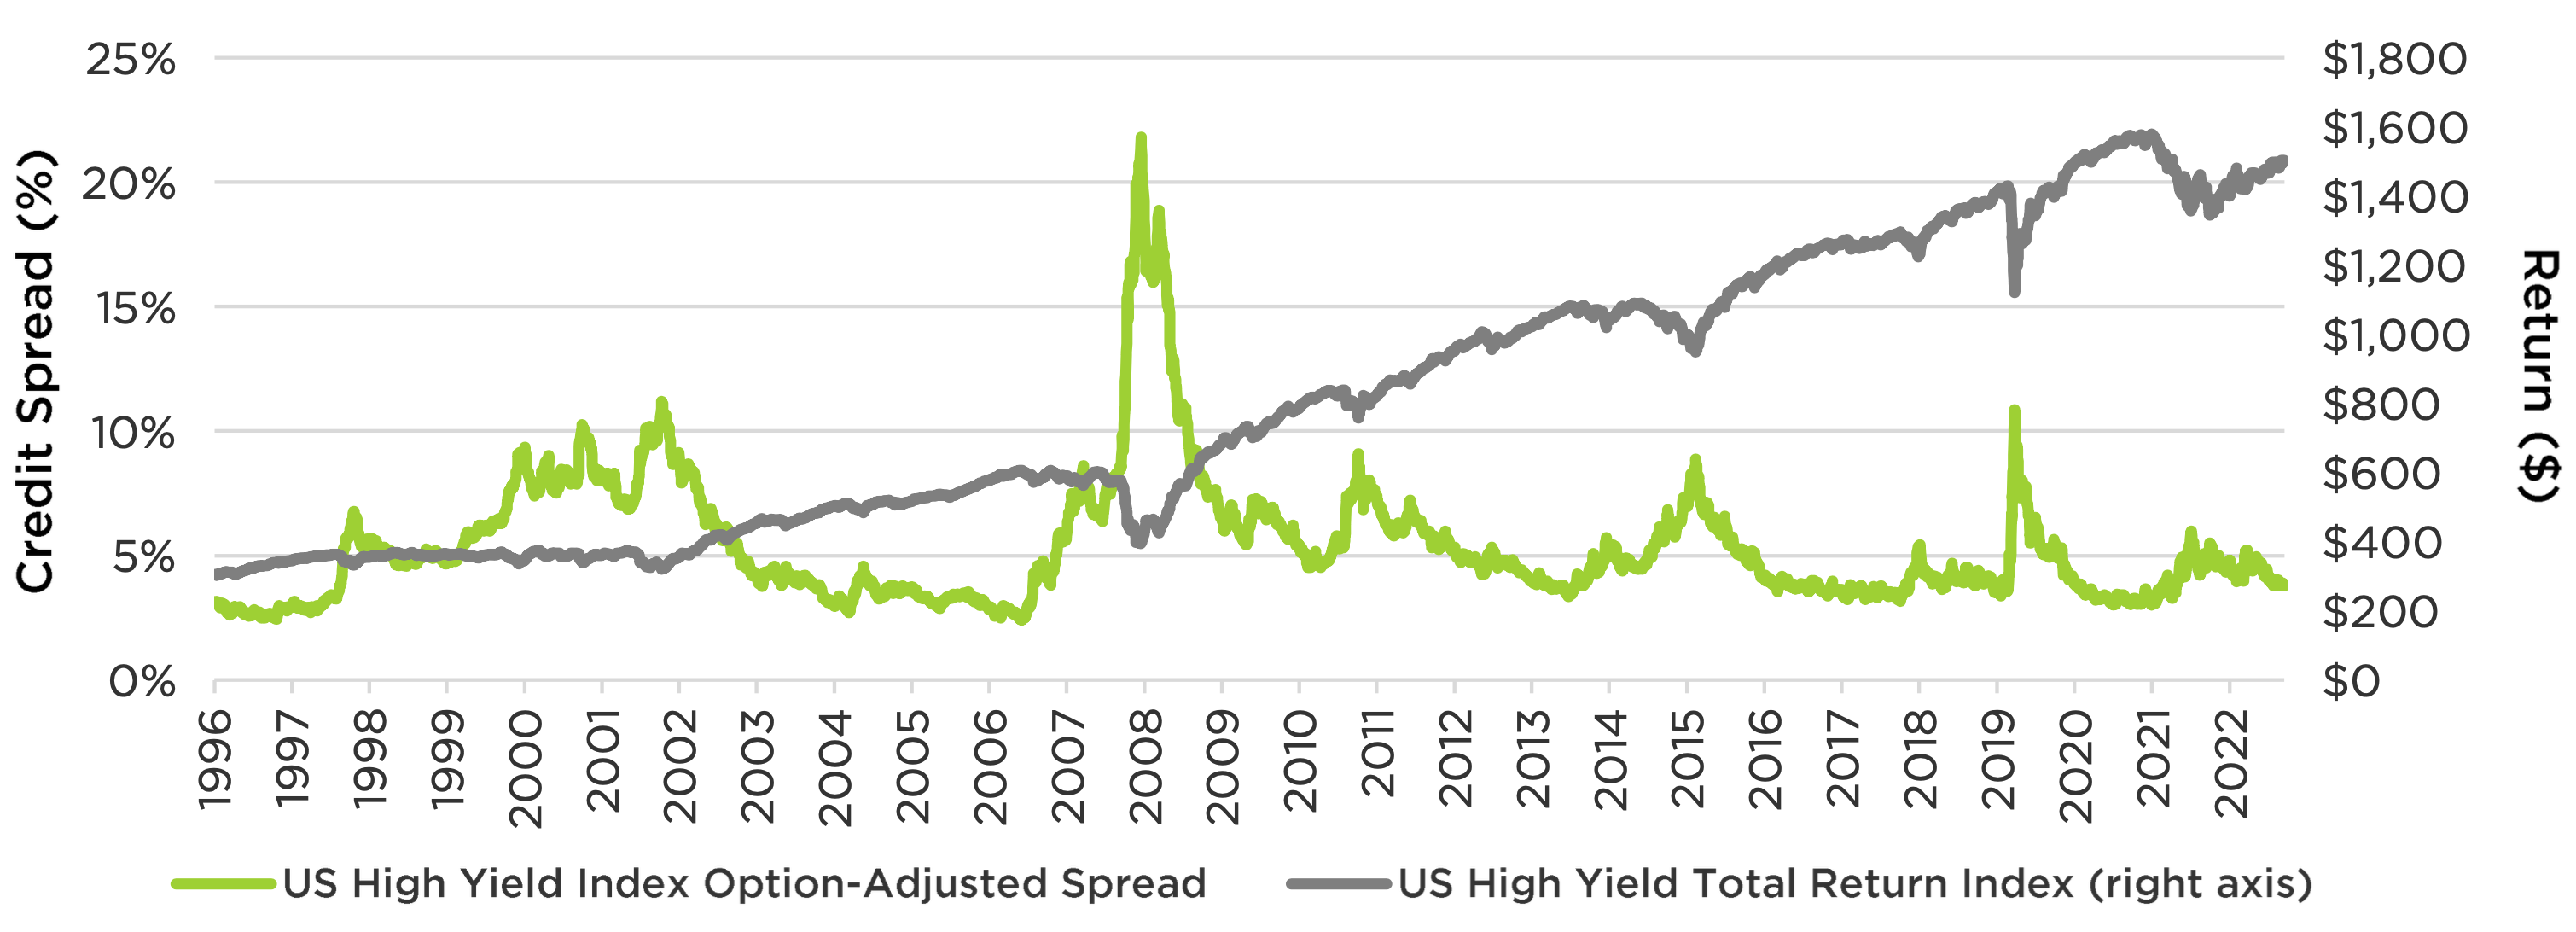 US High Yield Option-Adjusted Spread & Return: 1996 to Present